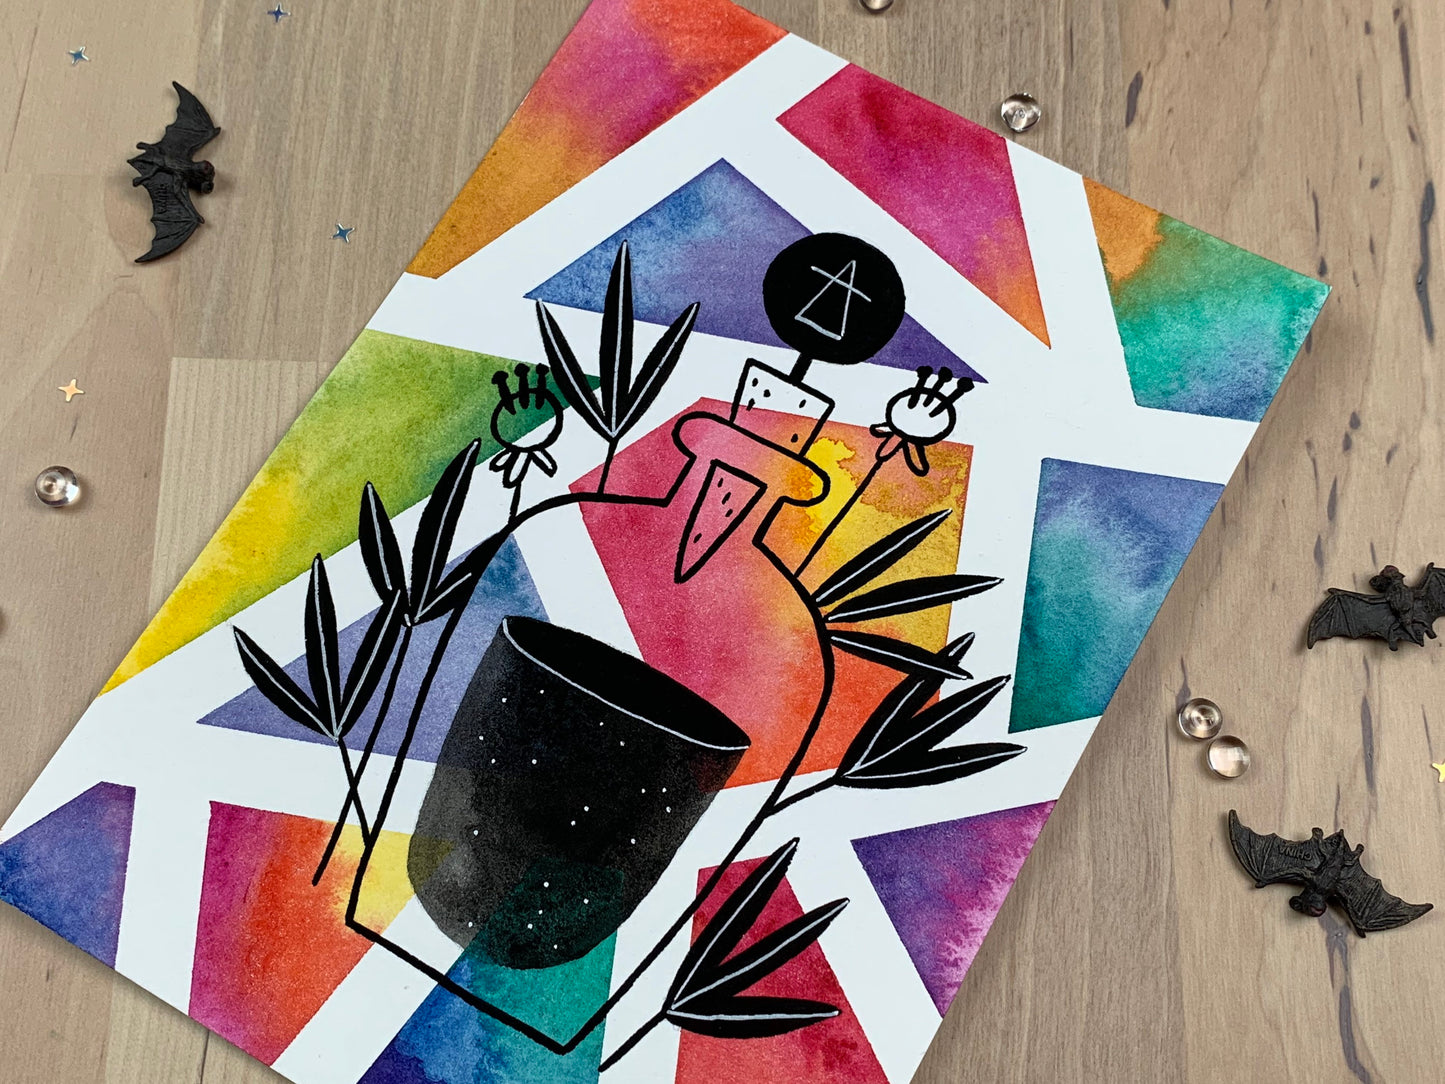 Original artwork depicting a colorful geometric watercolor and gouache painting of a potion bottle.